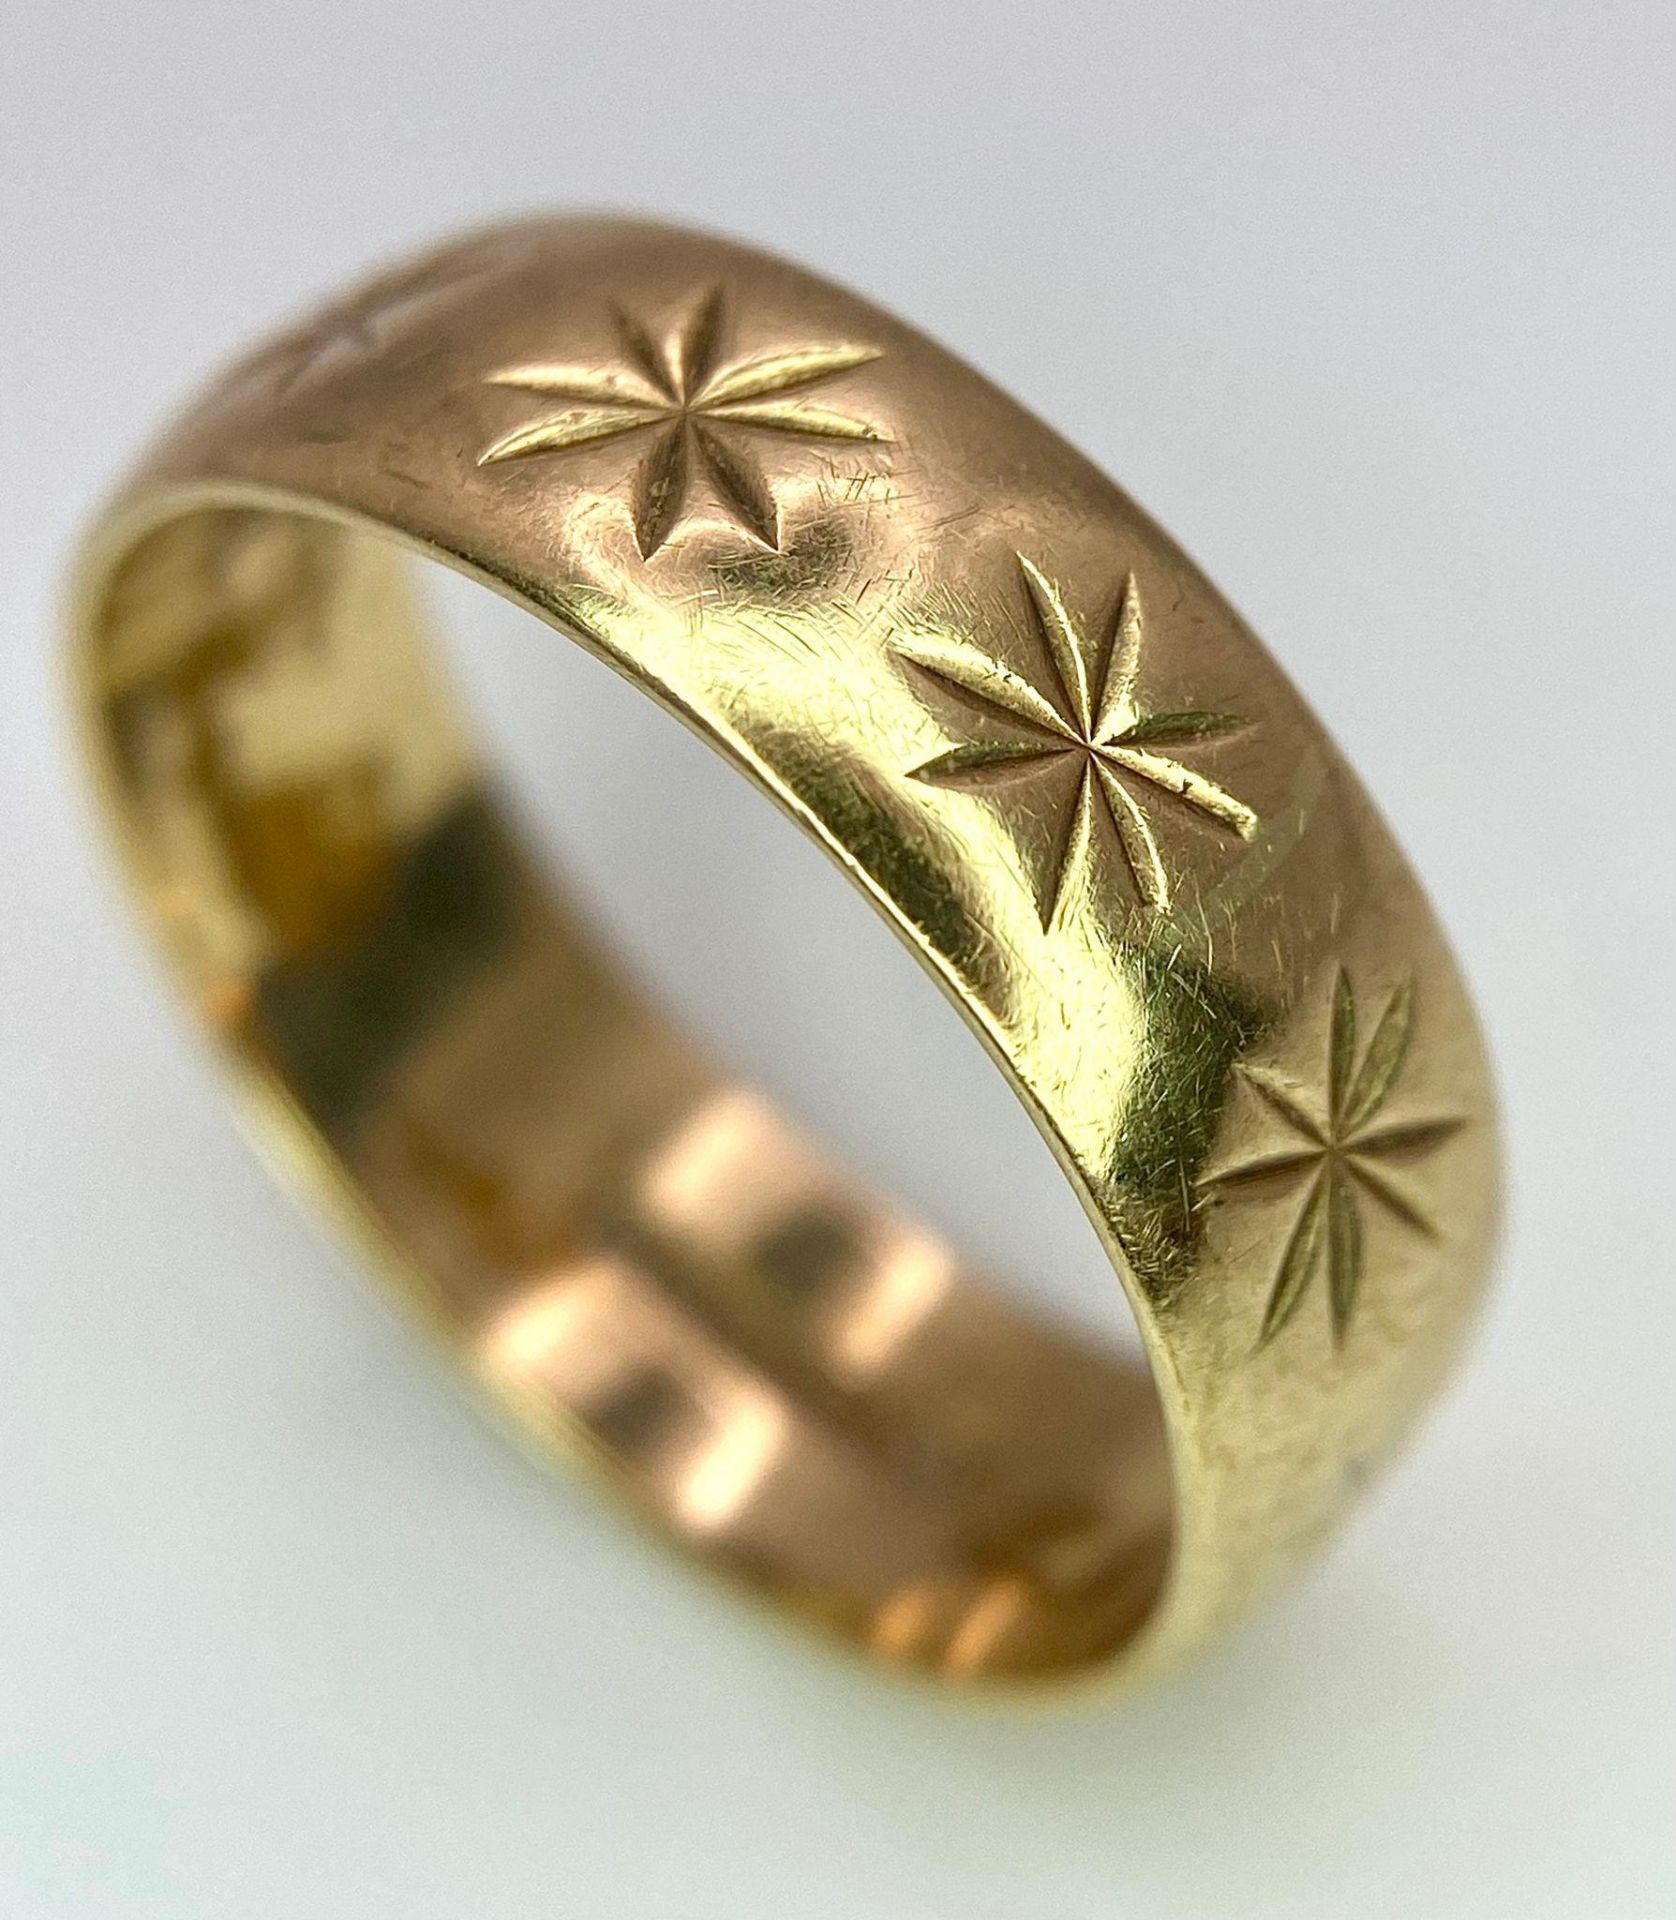 A Vintage 9K Yellow Gold Band Ring with Star Decoration. 5mm width. Size M. 2.8g weight. - Bild 3 aus 6